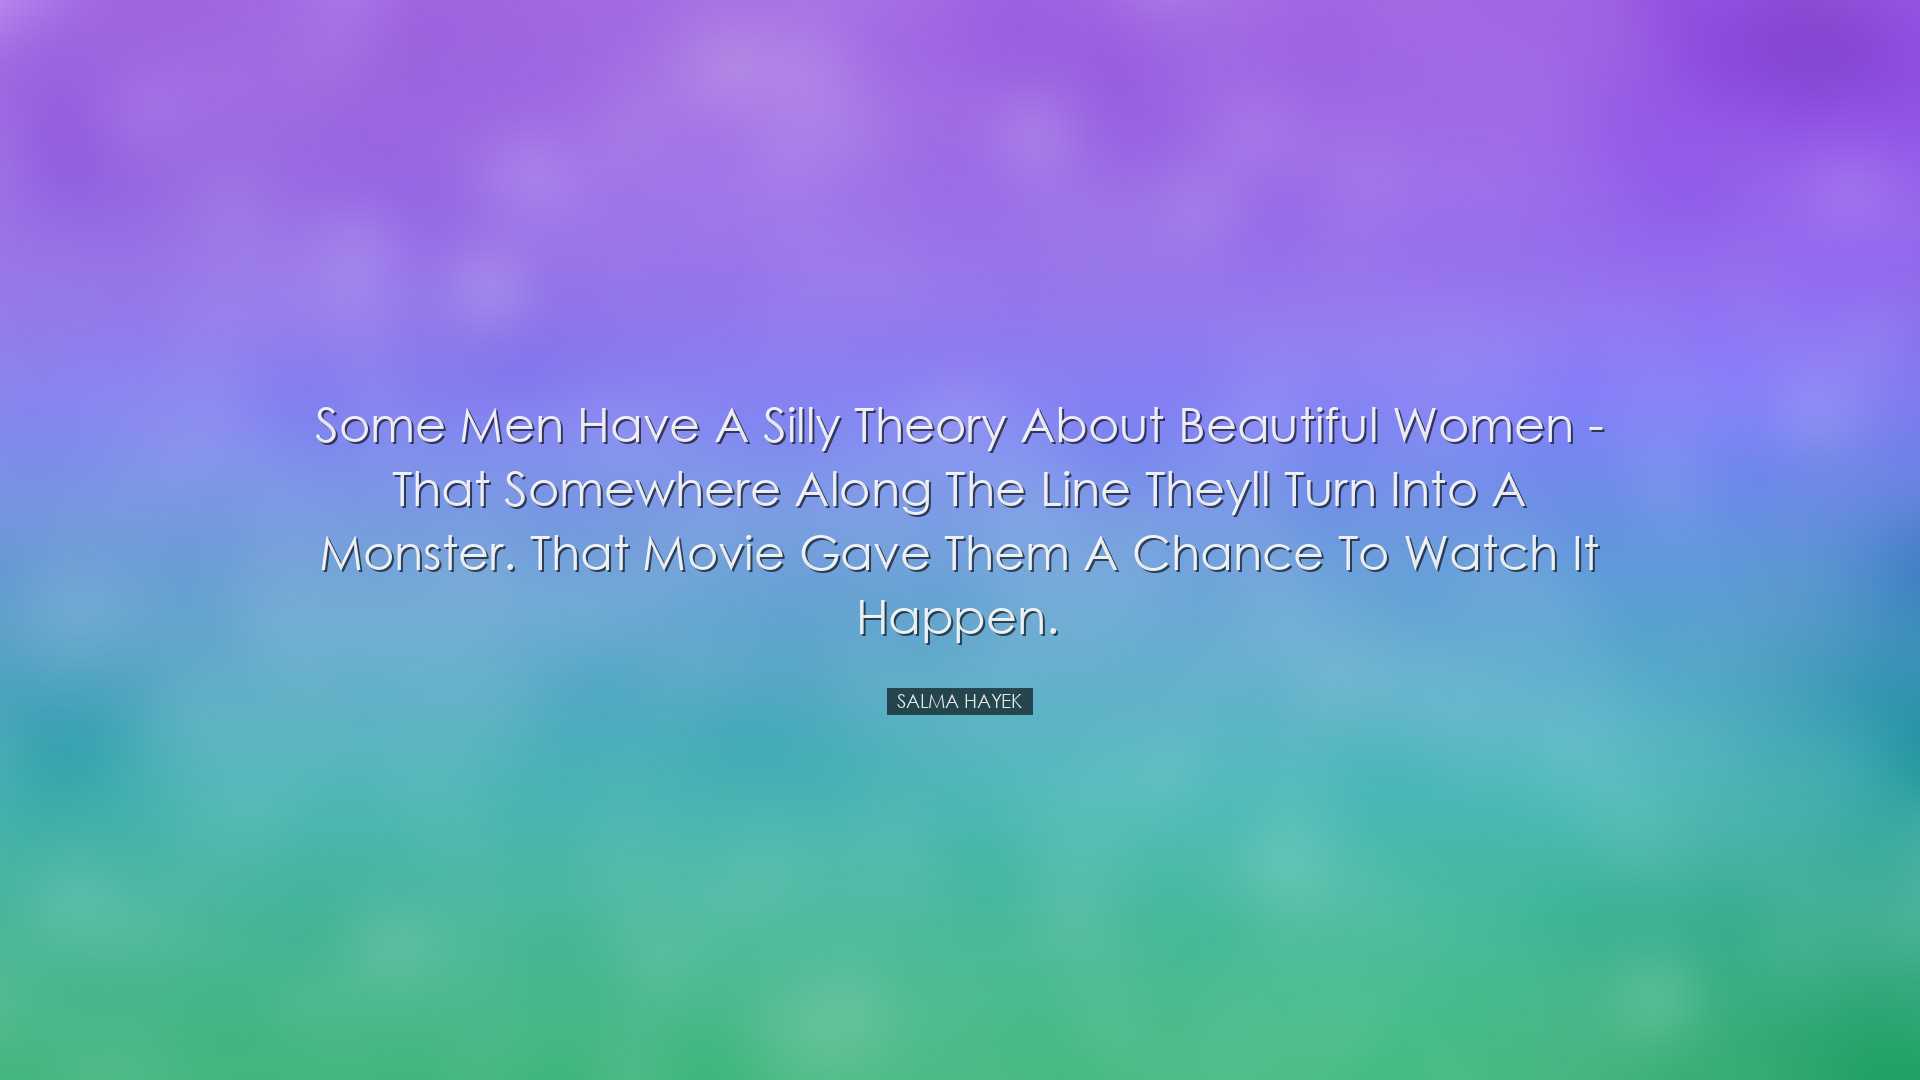 Some men have a silly theory about beautiful women - that somewher